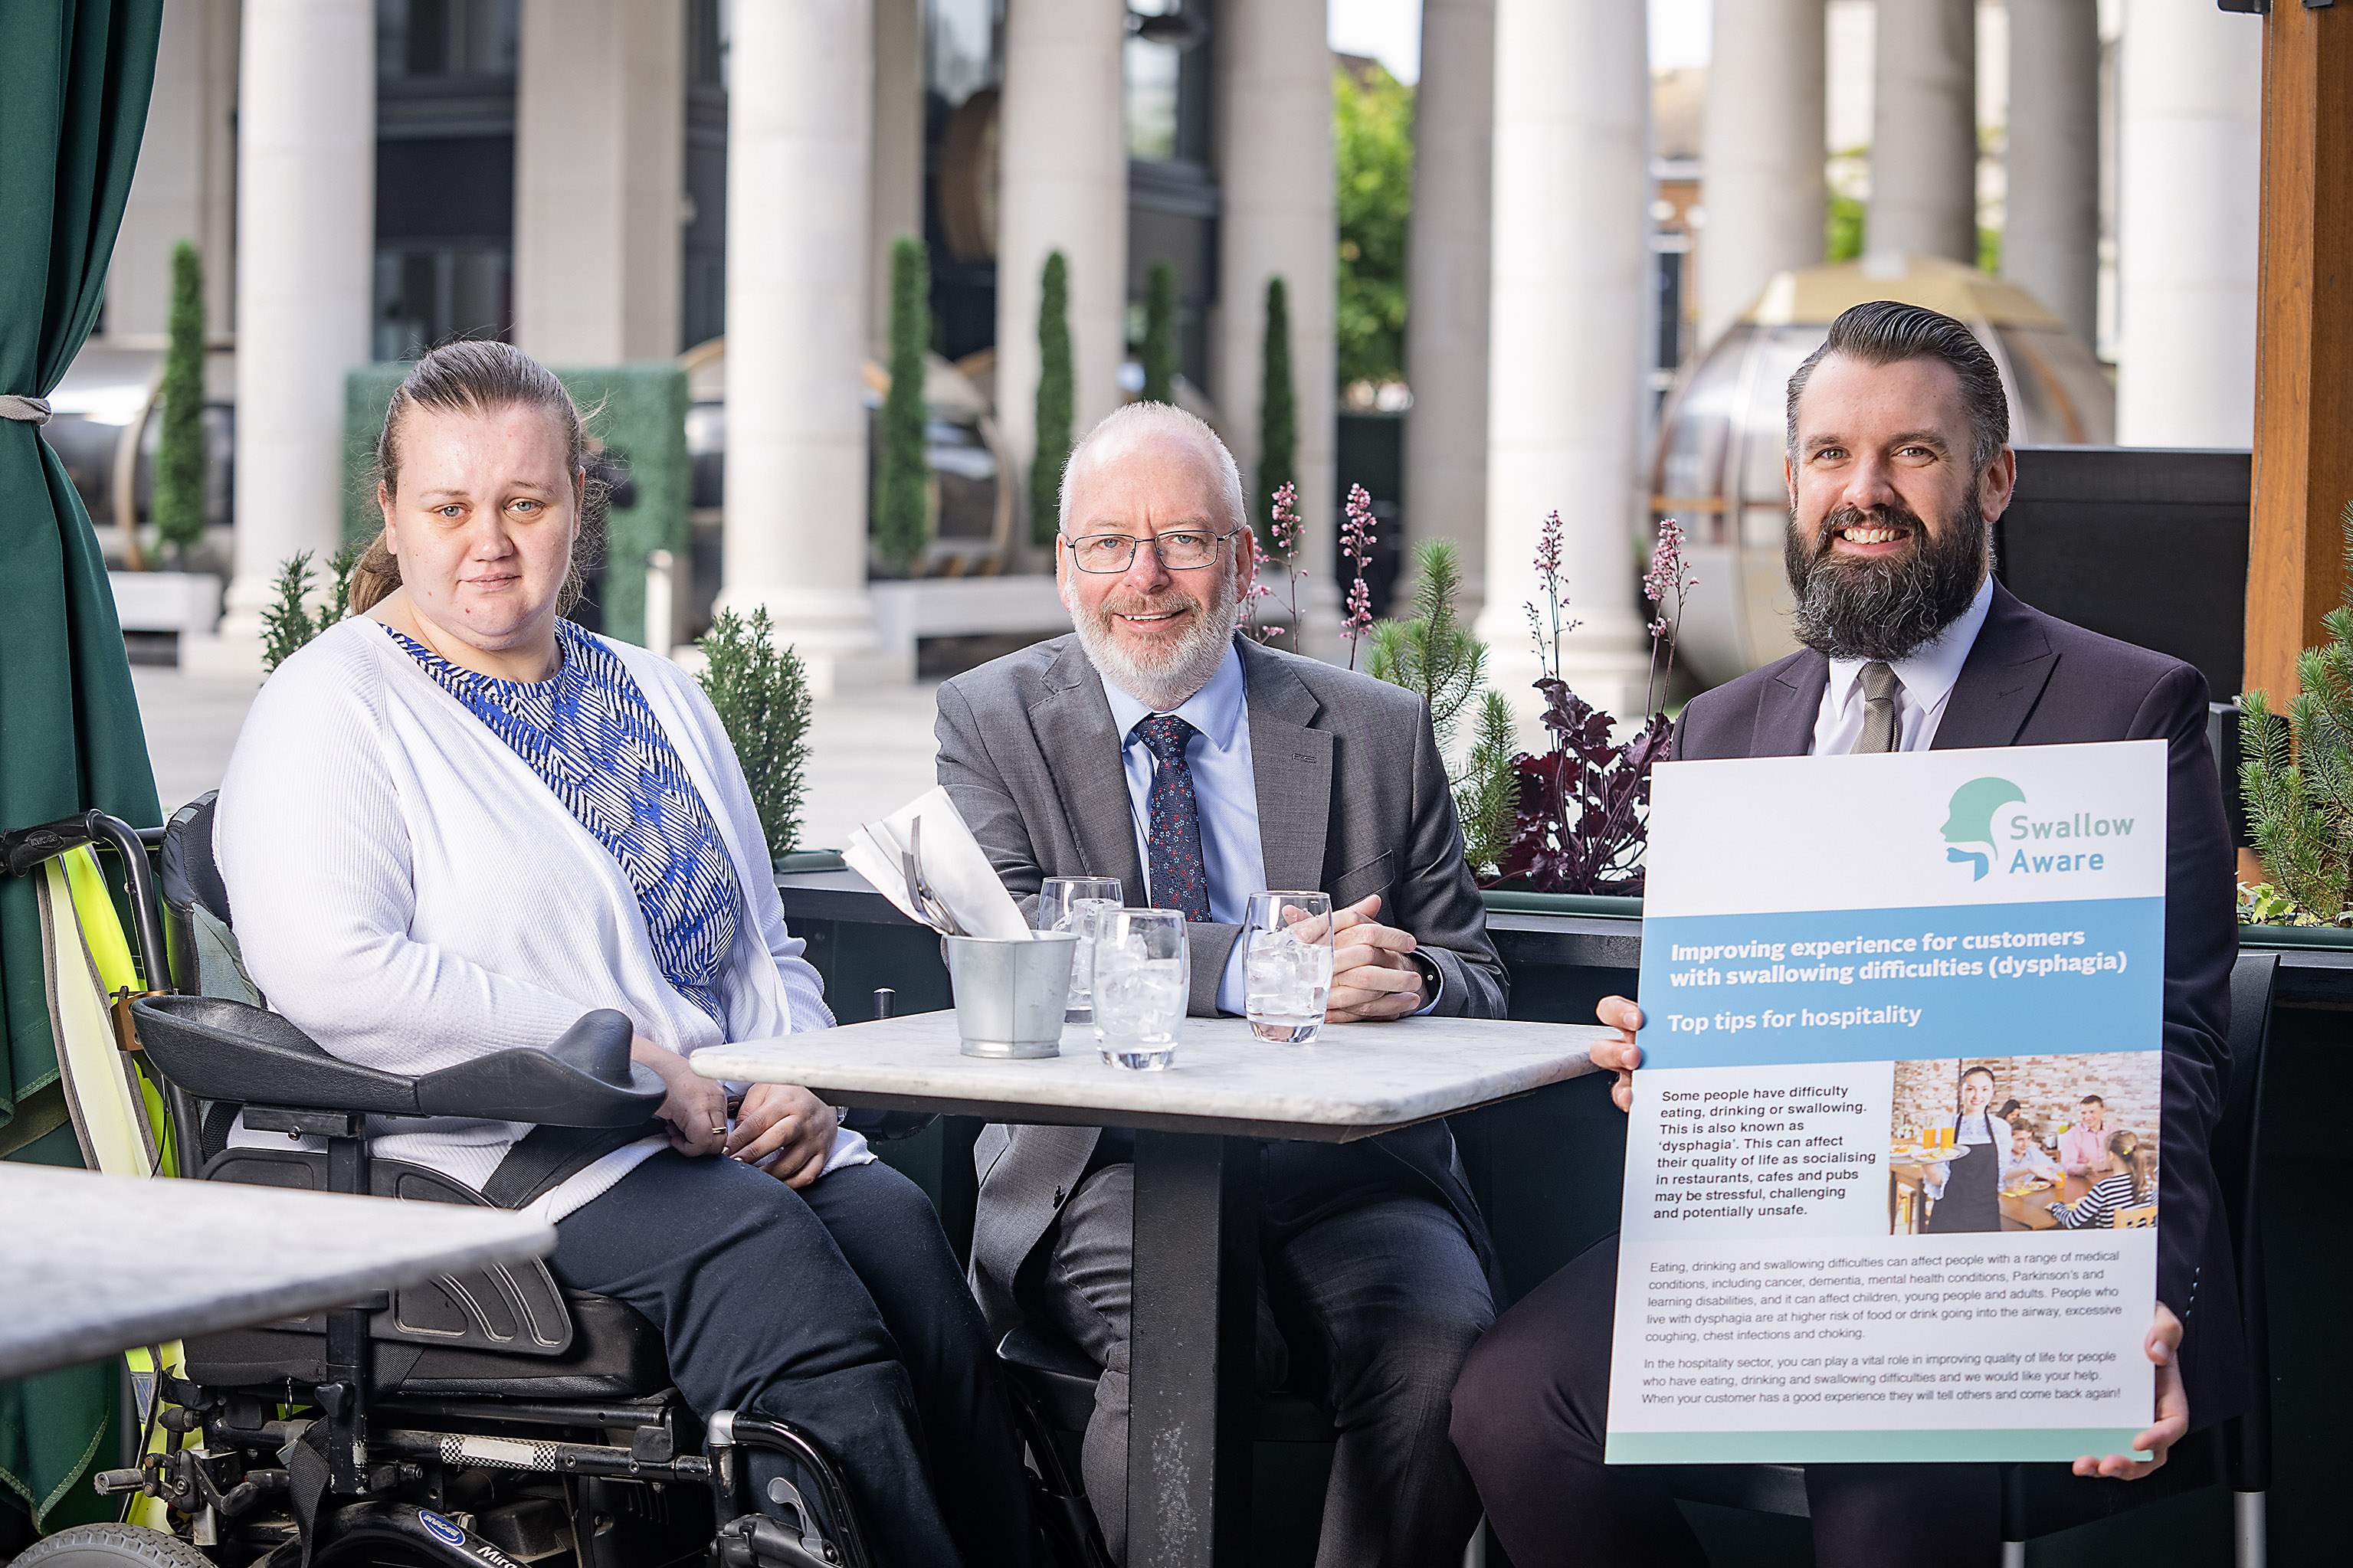 HEALTH AND HOSPITALITY TEAM UP TO IMPROVE LIVES OF PEOPLE WITH SWALLOWING DIFFICULTIES